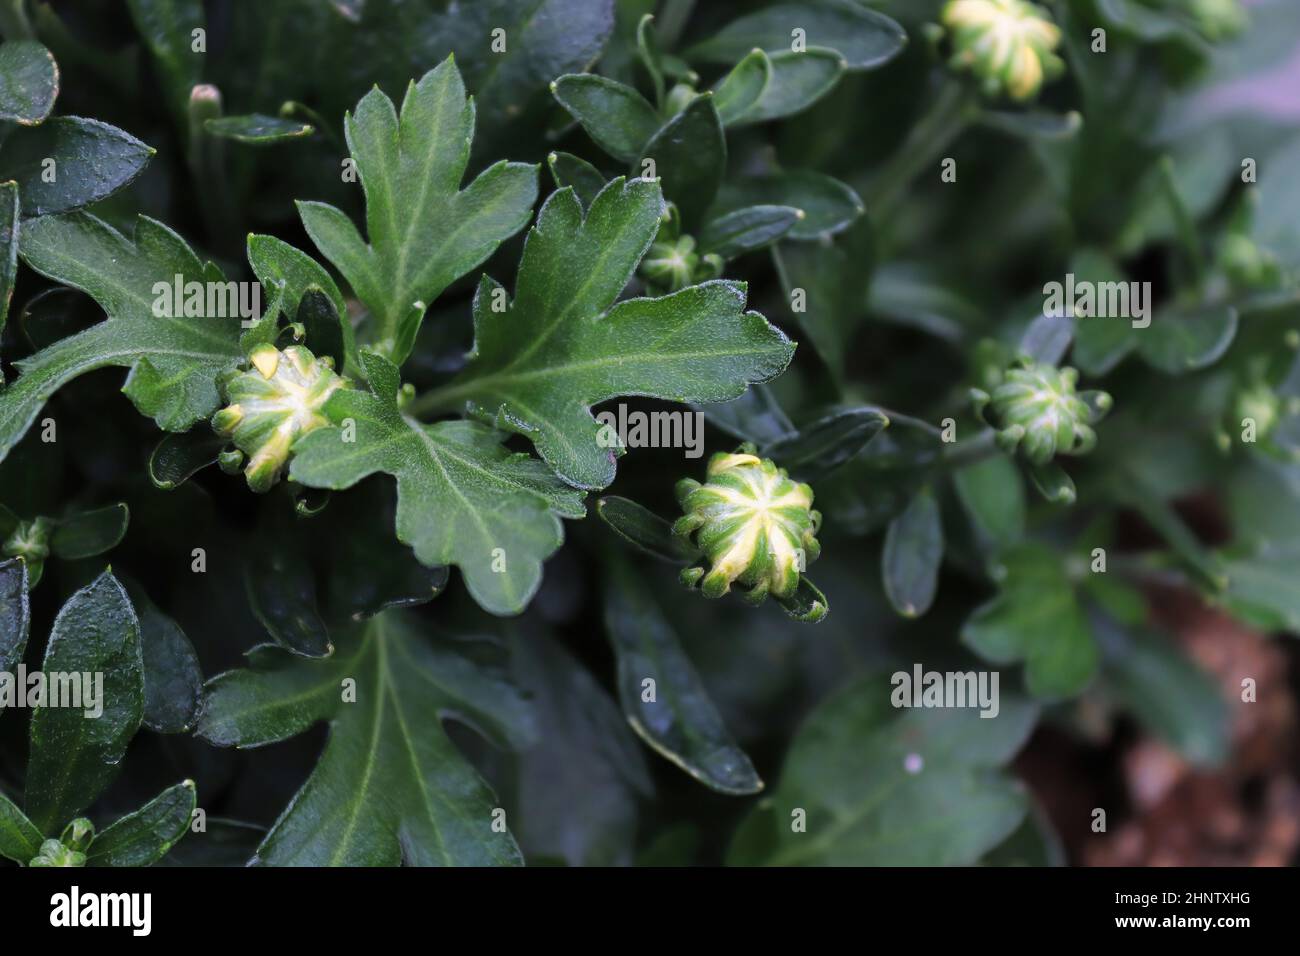 View of budding garden mums between leaves. Stock Photo